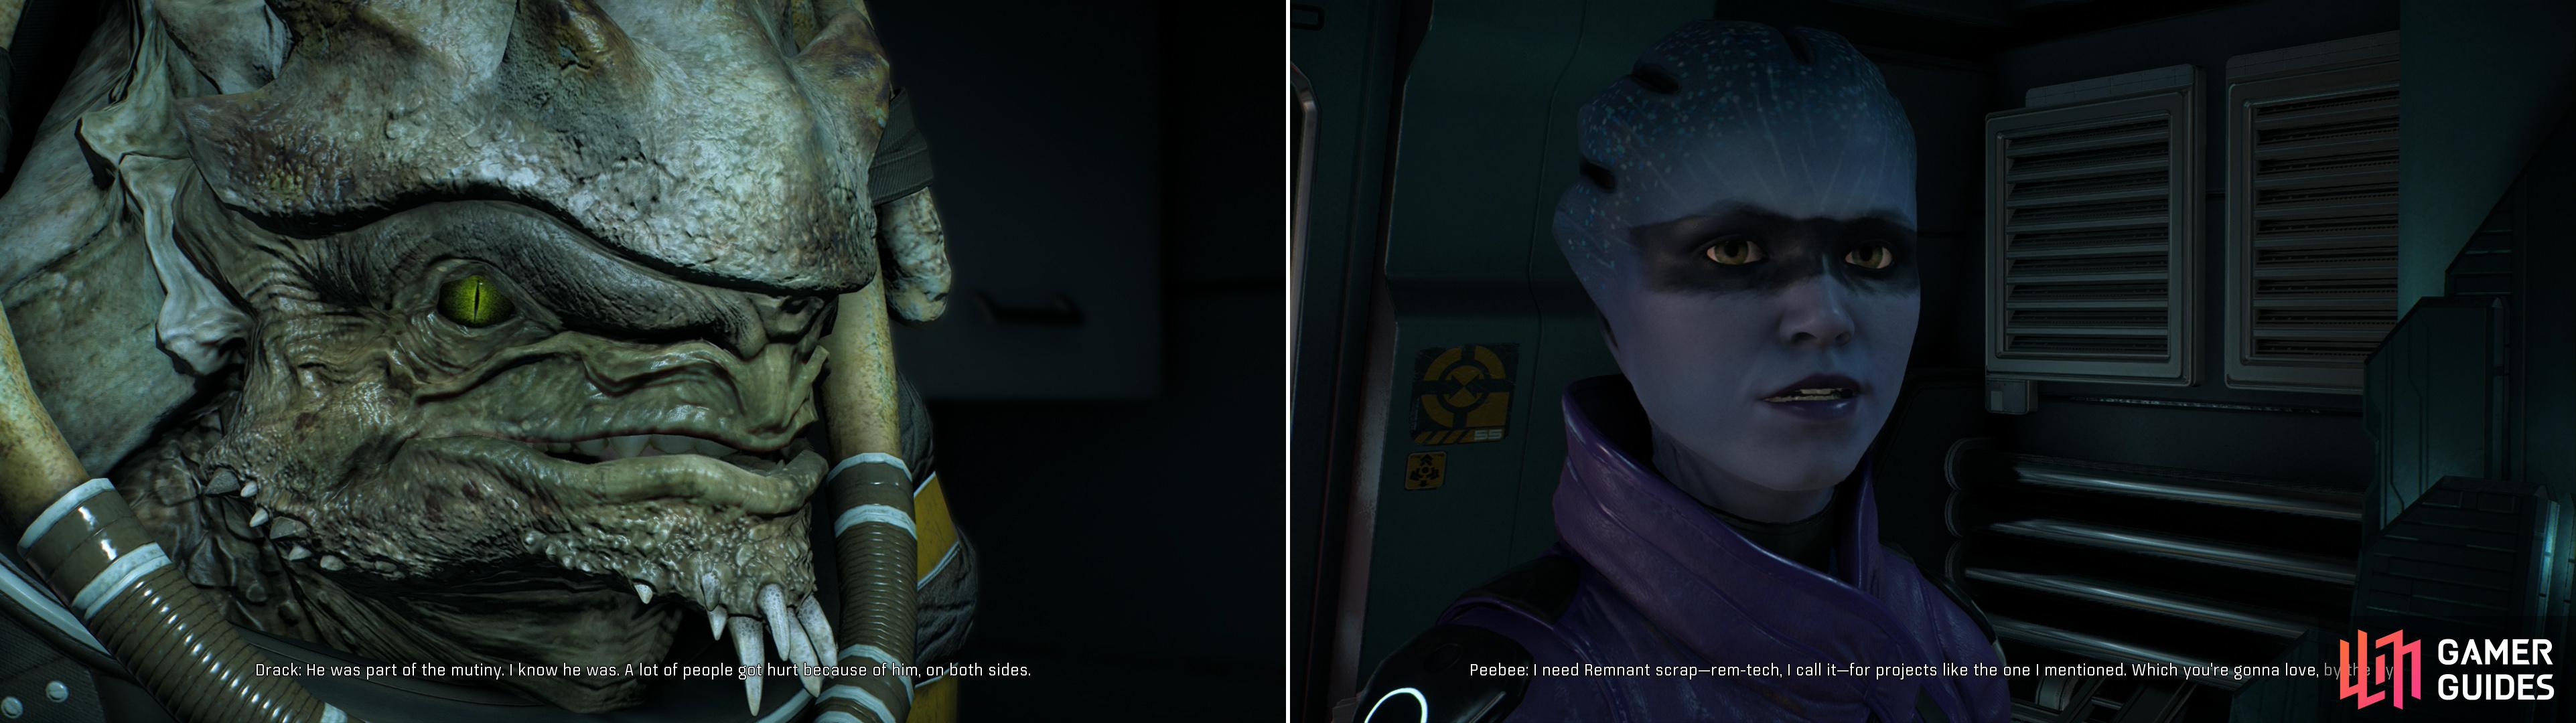 Chat with Drack (left) and Peebee (right) on the Tempest to learn more about your new crewmembers and perhaps start up a new quest.